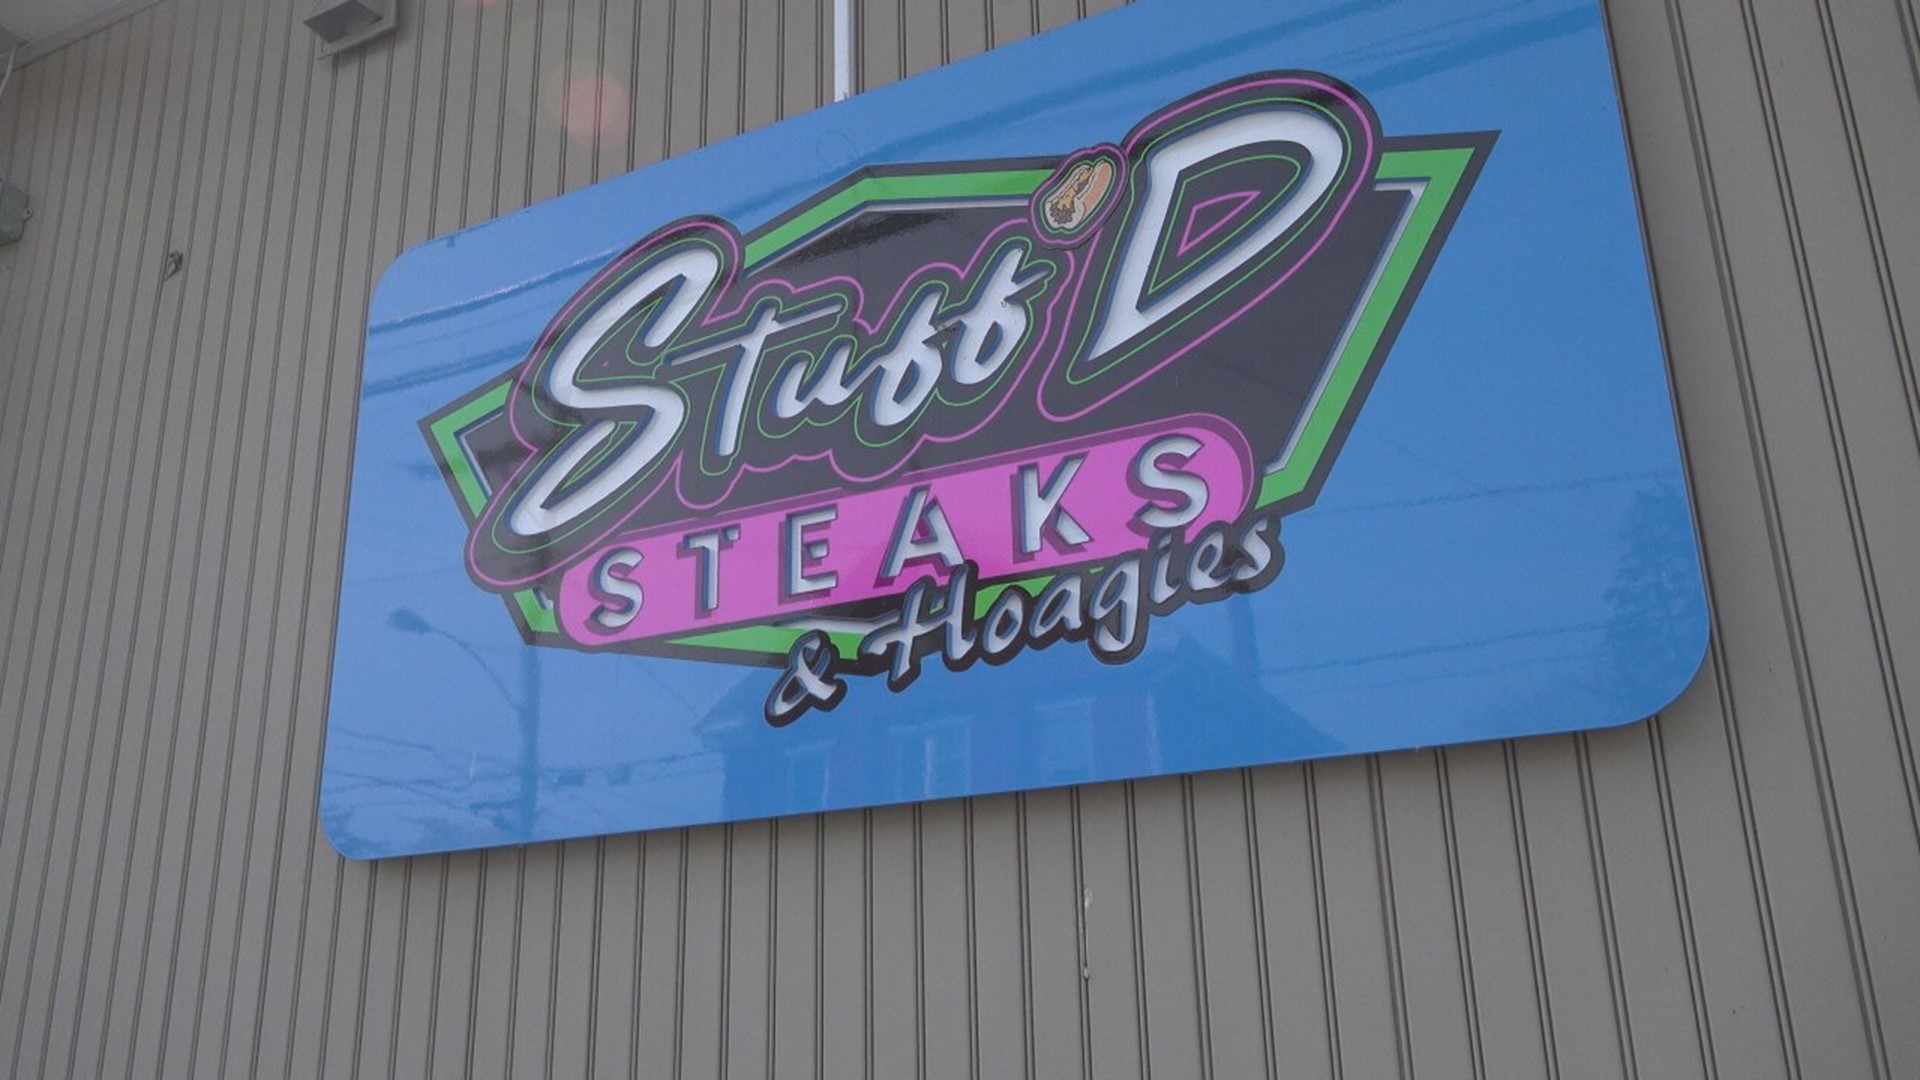 Stuff'd Steaks has officially reopened its doors after the restaurant was robbed and vandalized on April 5.